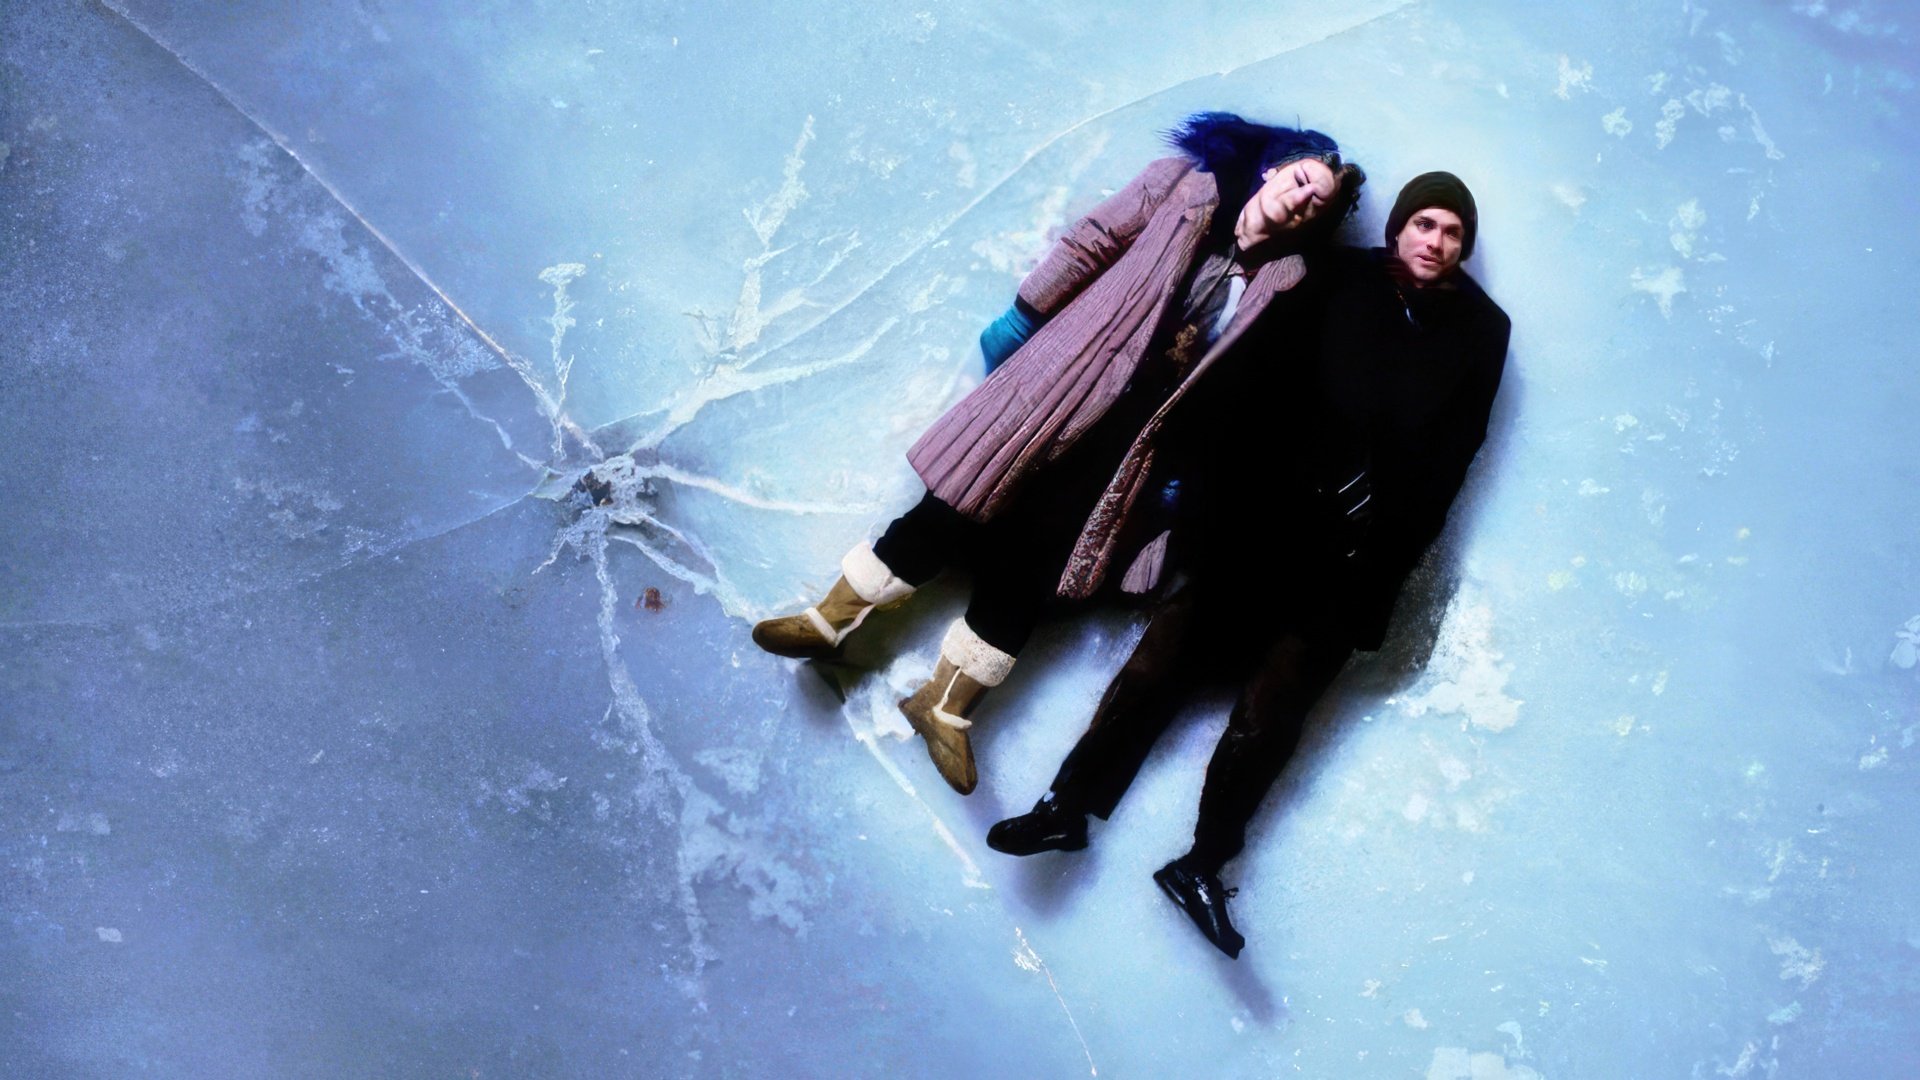 Jim Carrey and Kate Winslet in the «Eternal Sunshine of the Spotless Mind»